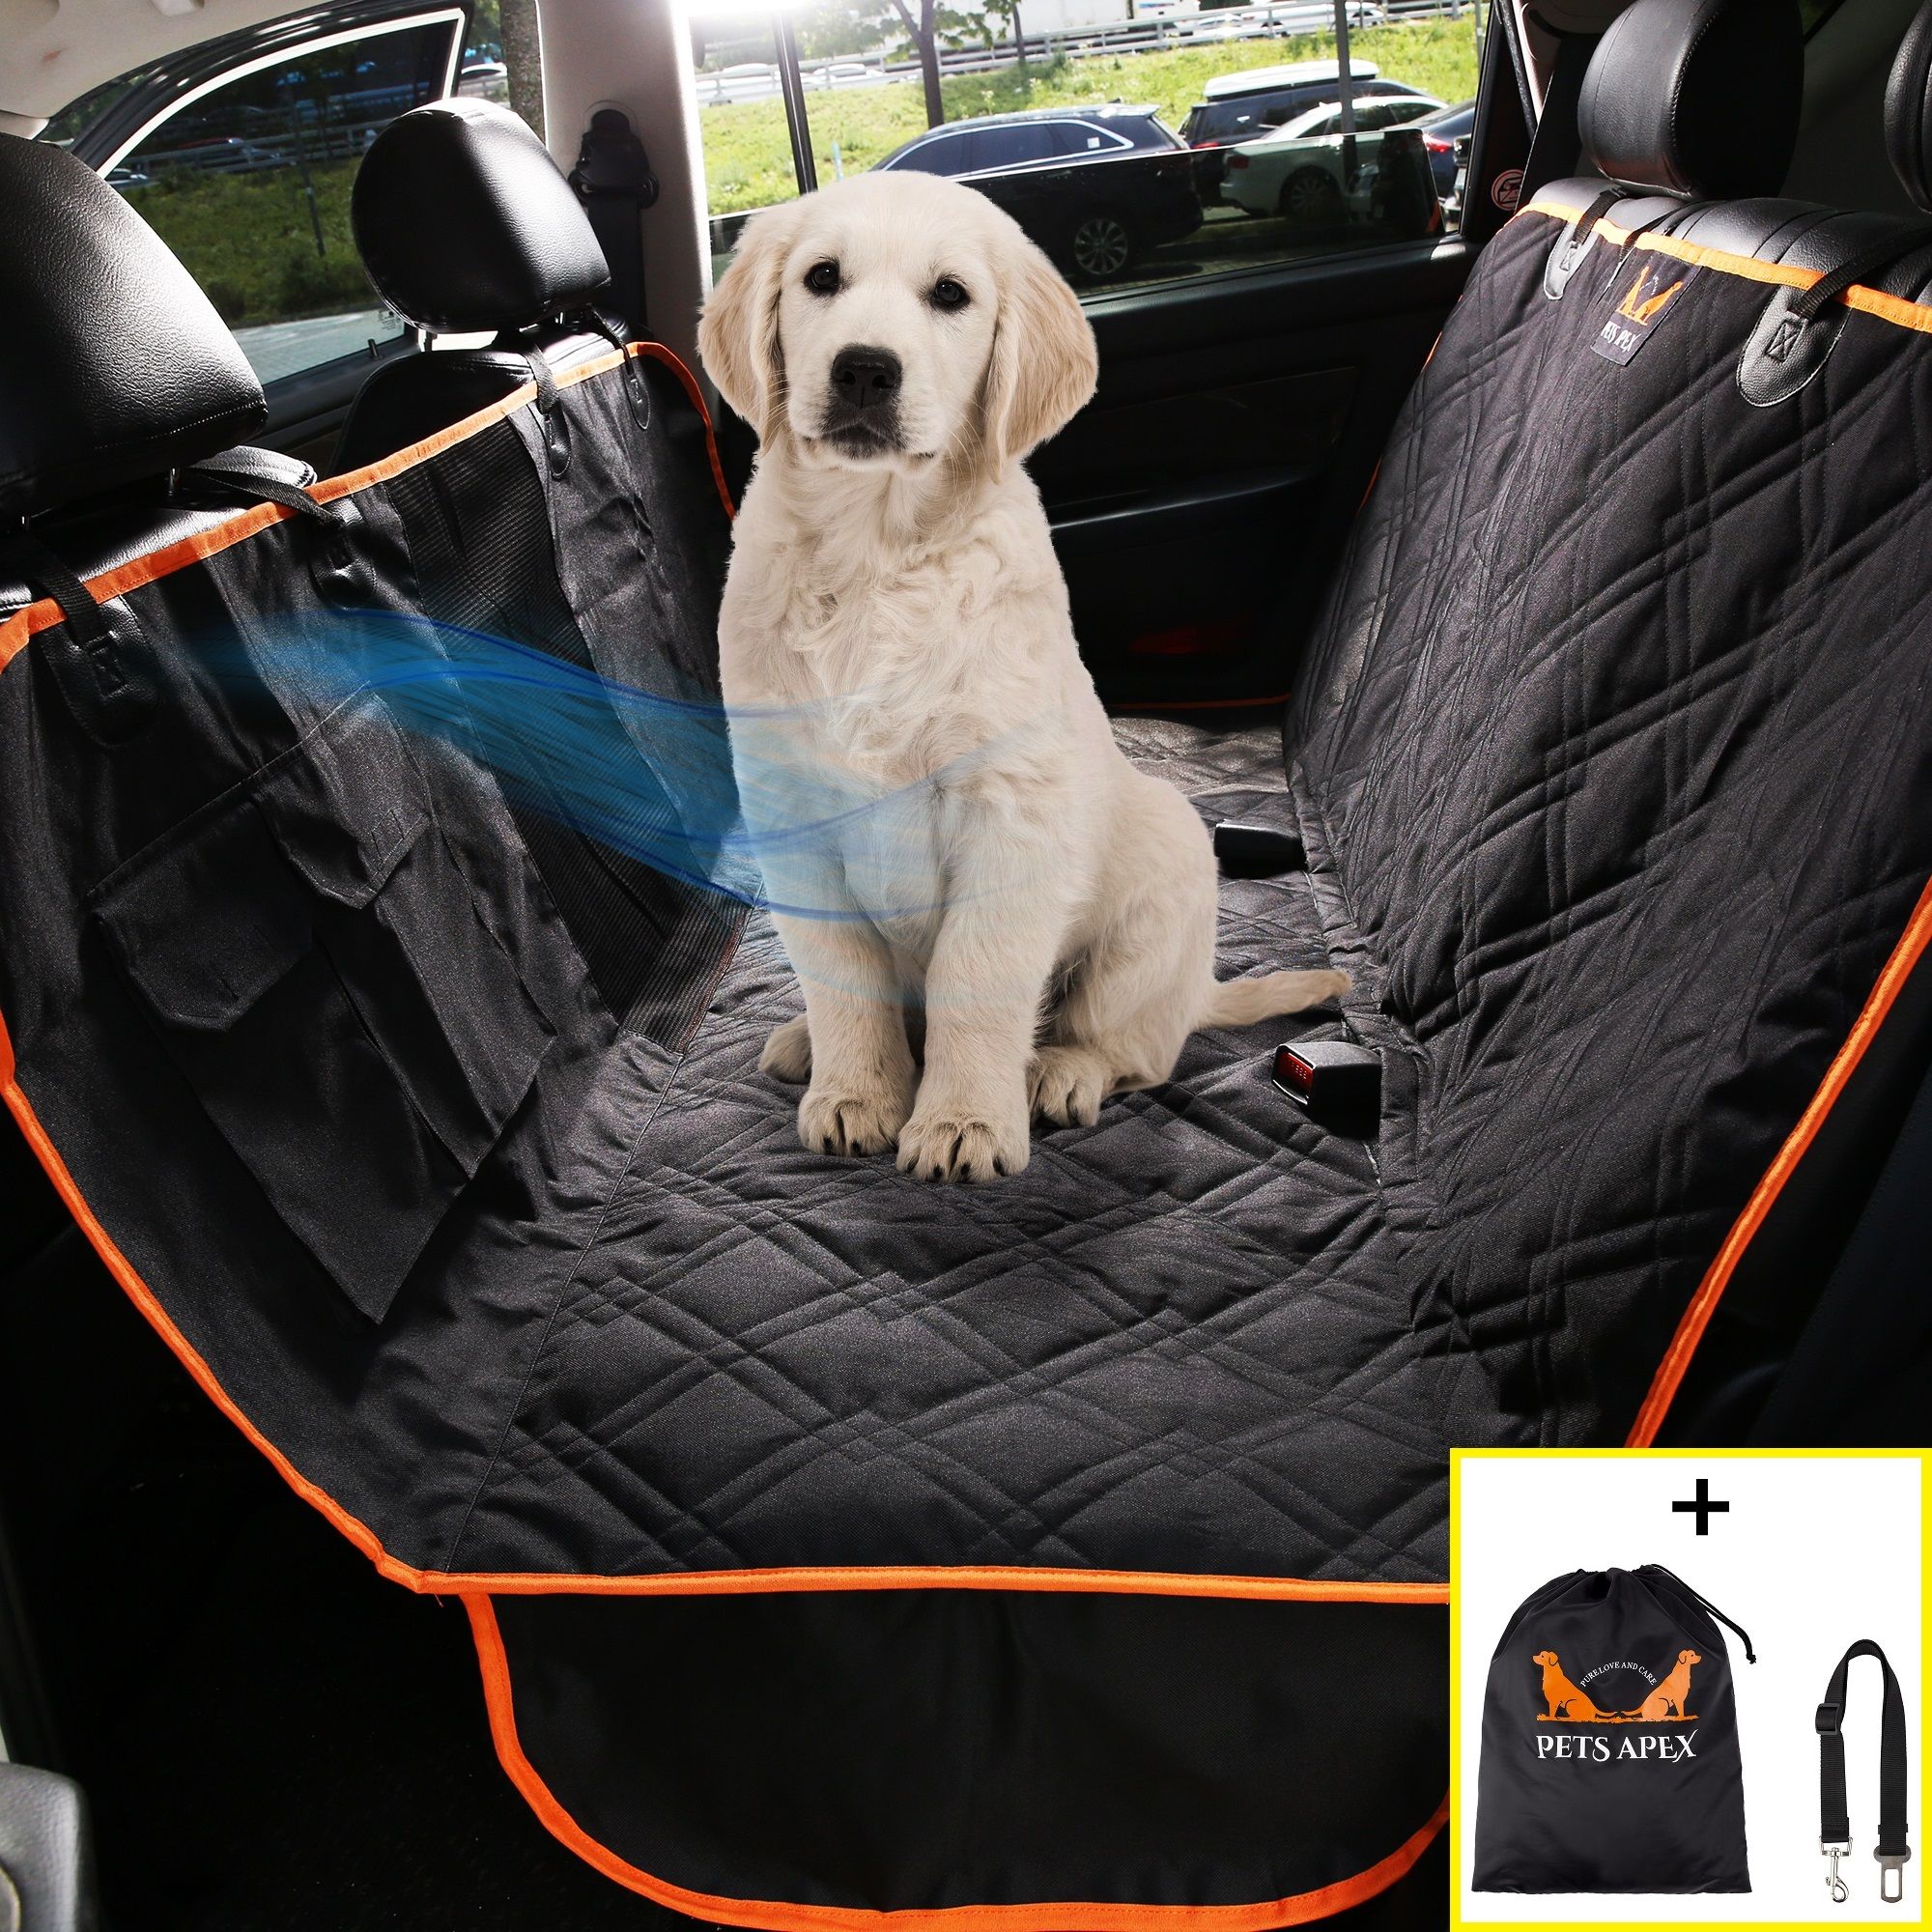 Pets Apex Dog Car Seat Covers - Black Durable Heavy Duty Bench Seats